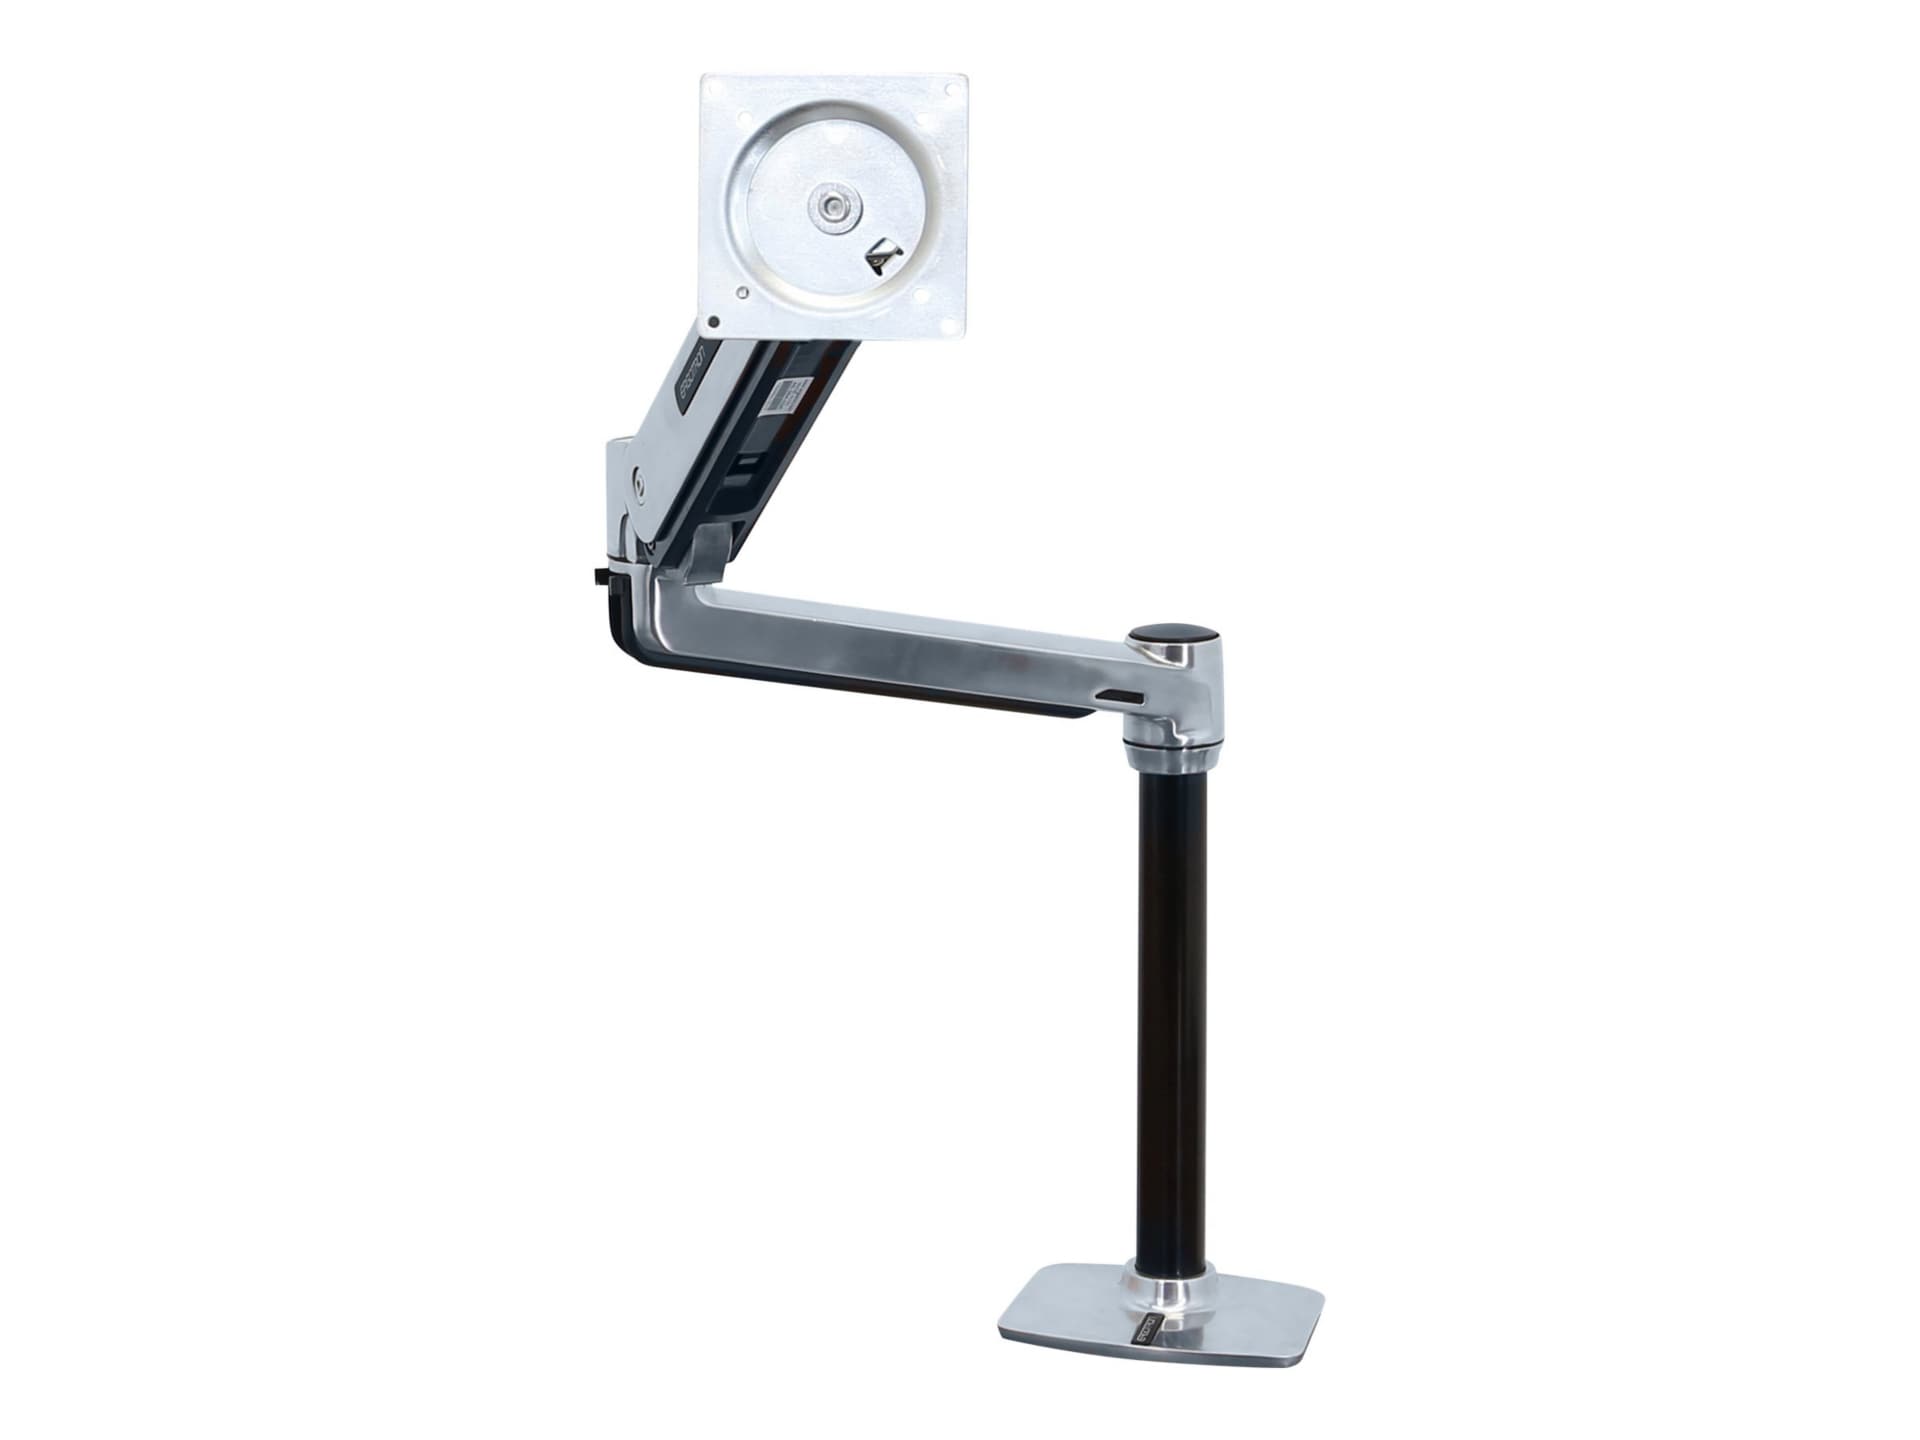 Ergotron LX HD Sit-Stand mounting kit - Patented Constant Force Technology